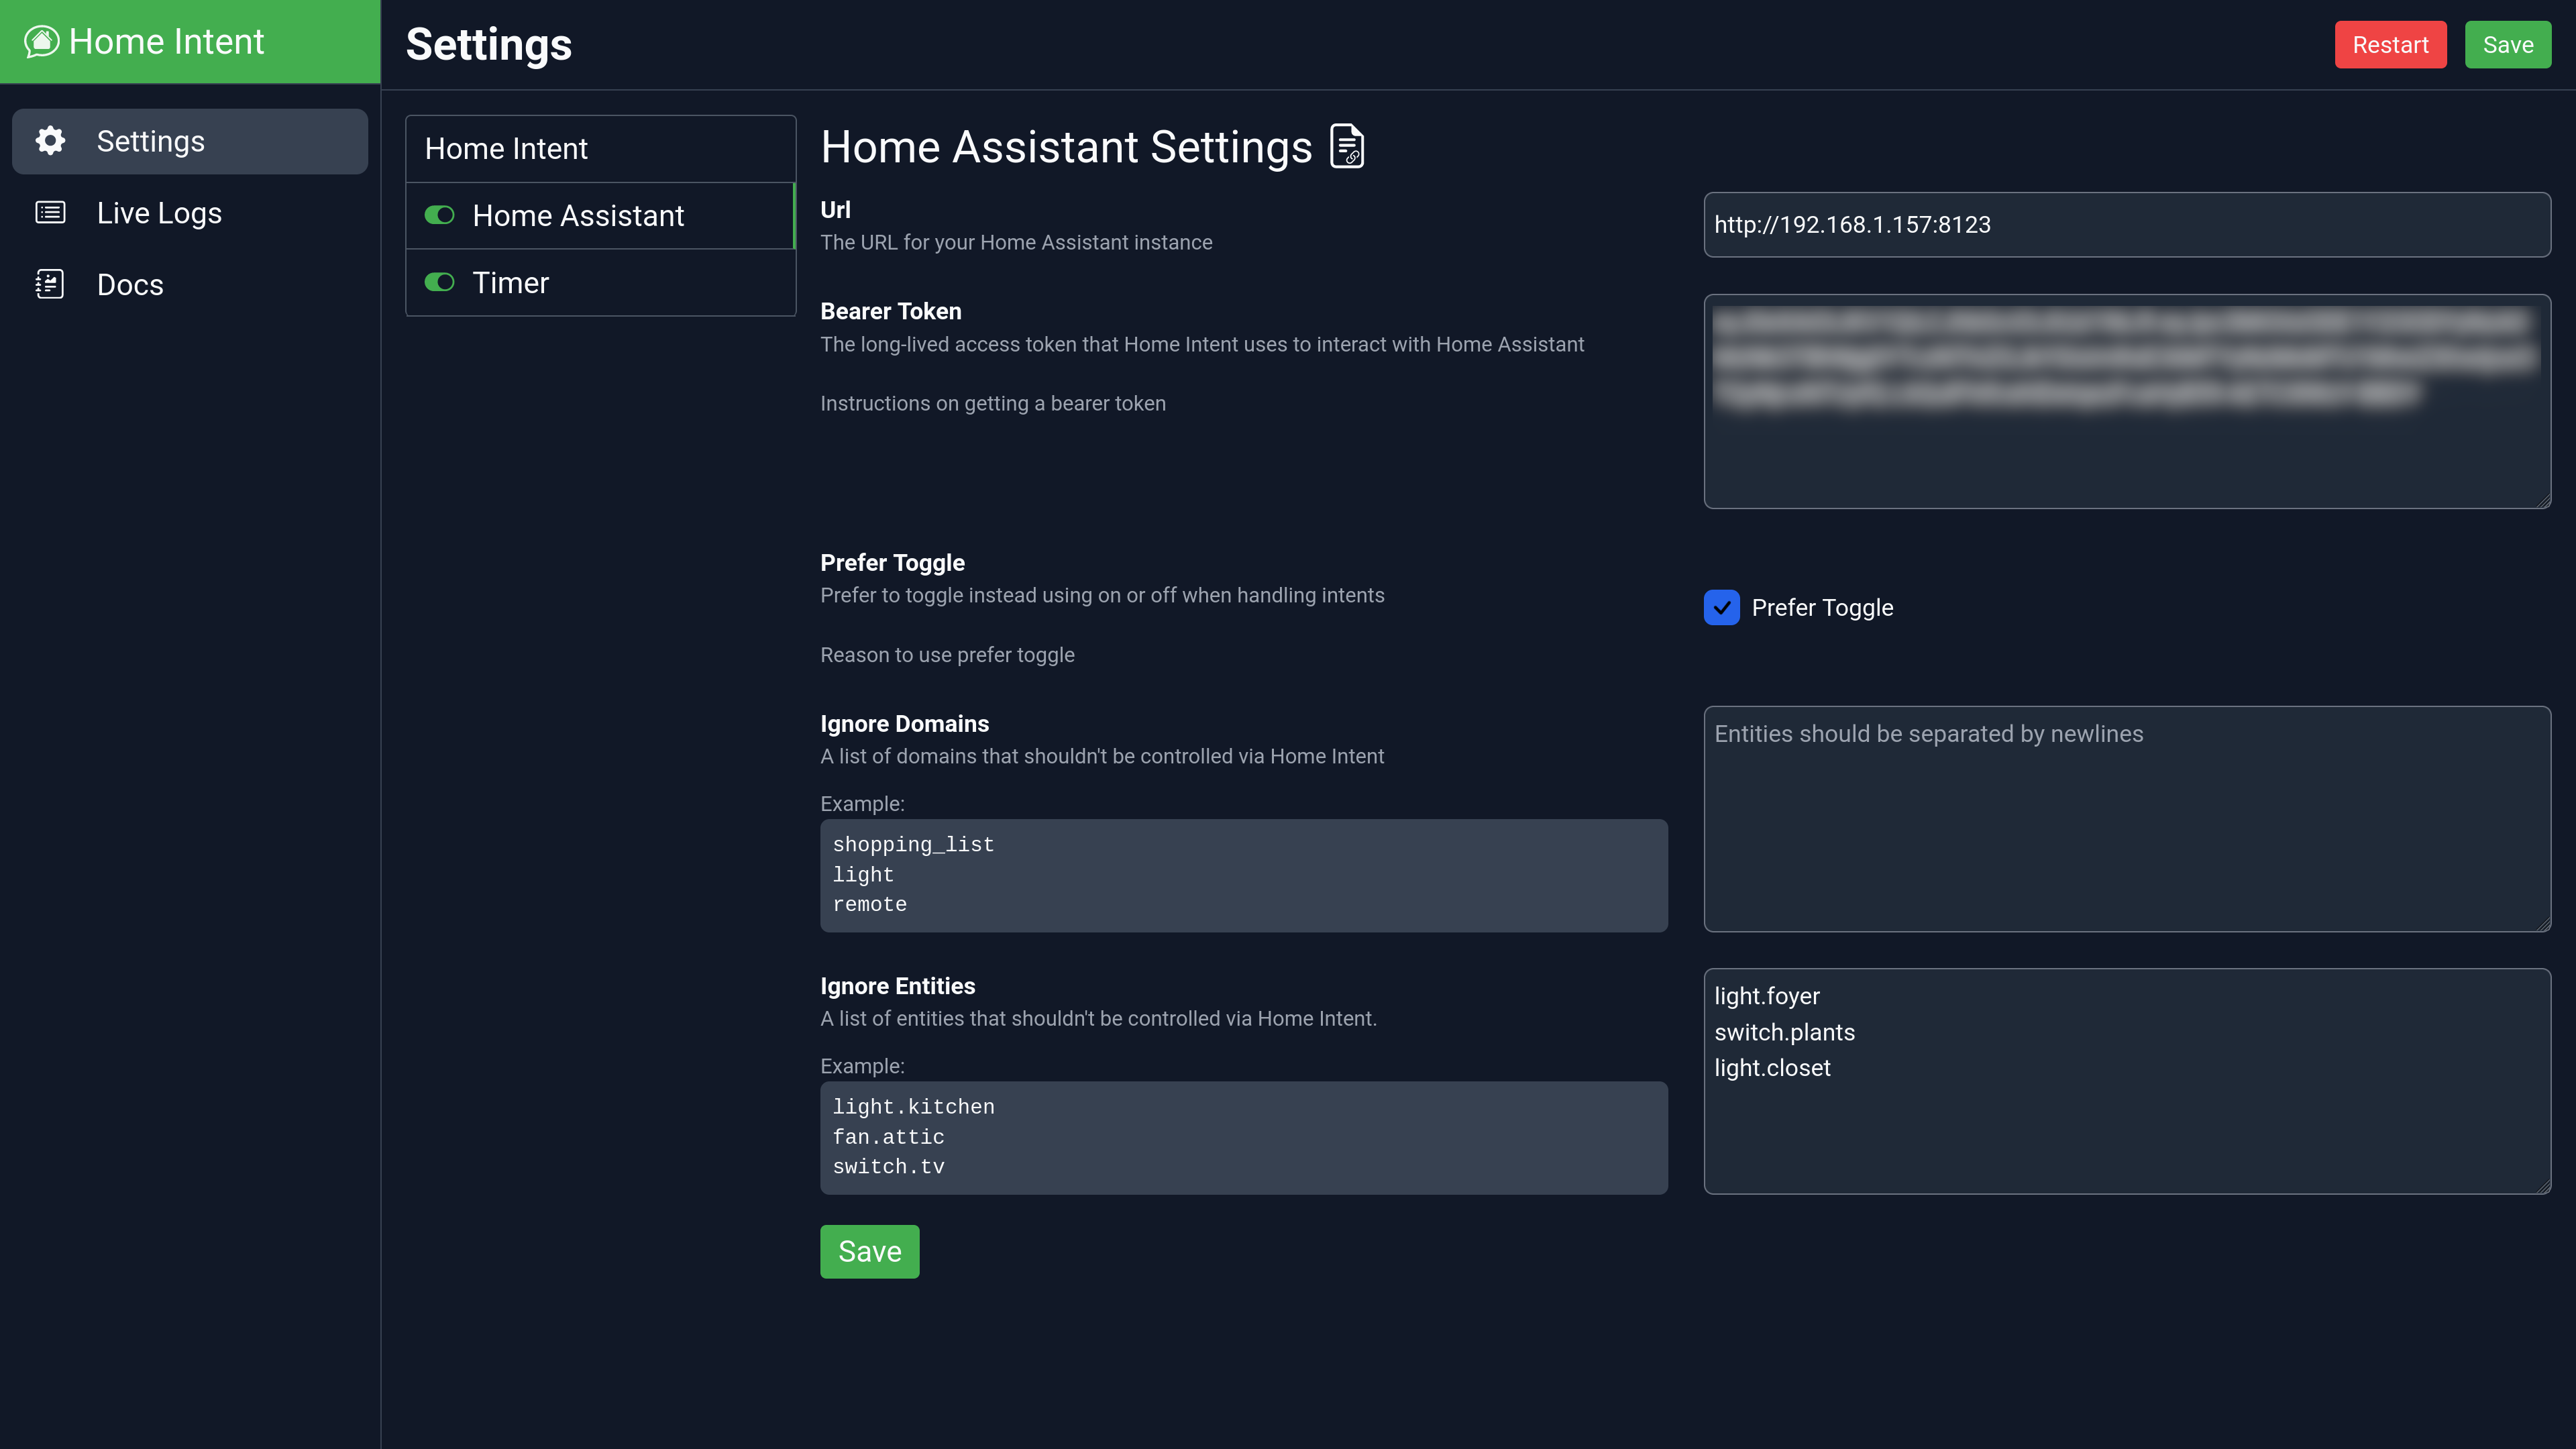 Home Assistant Settings